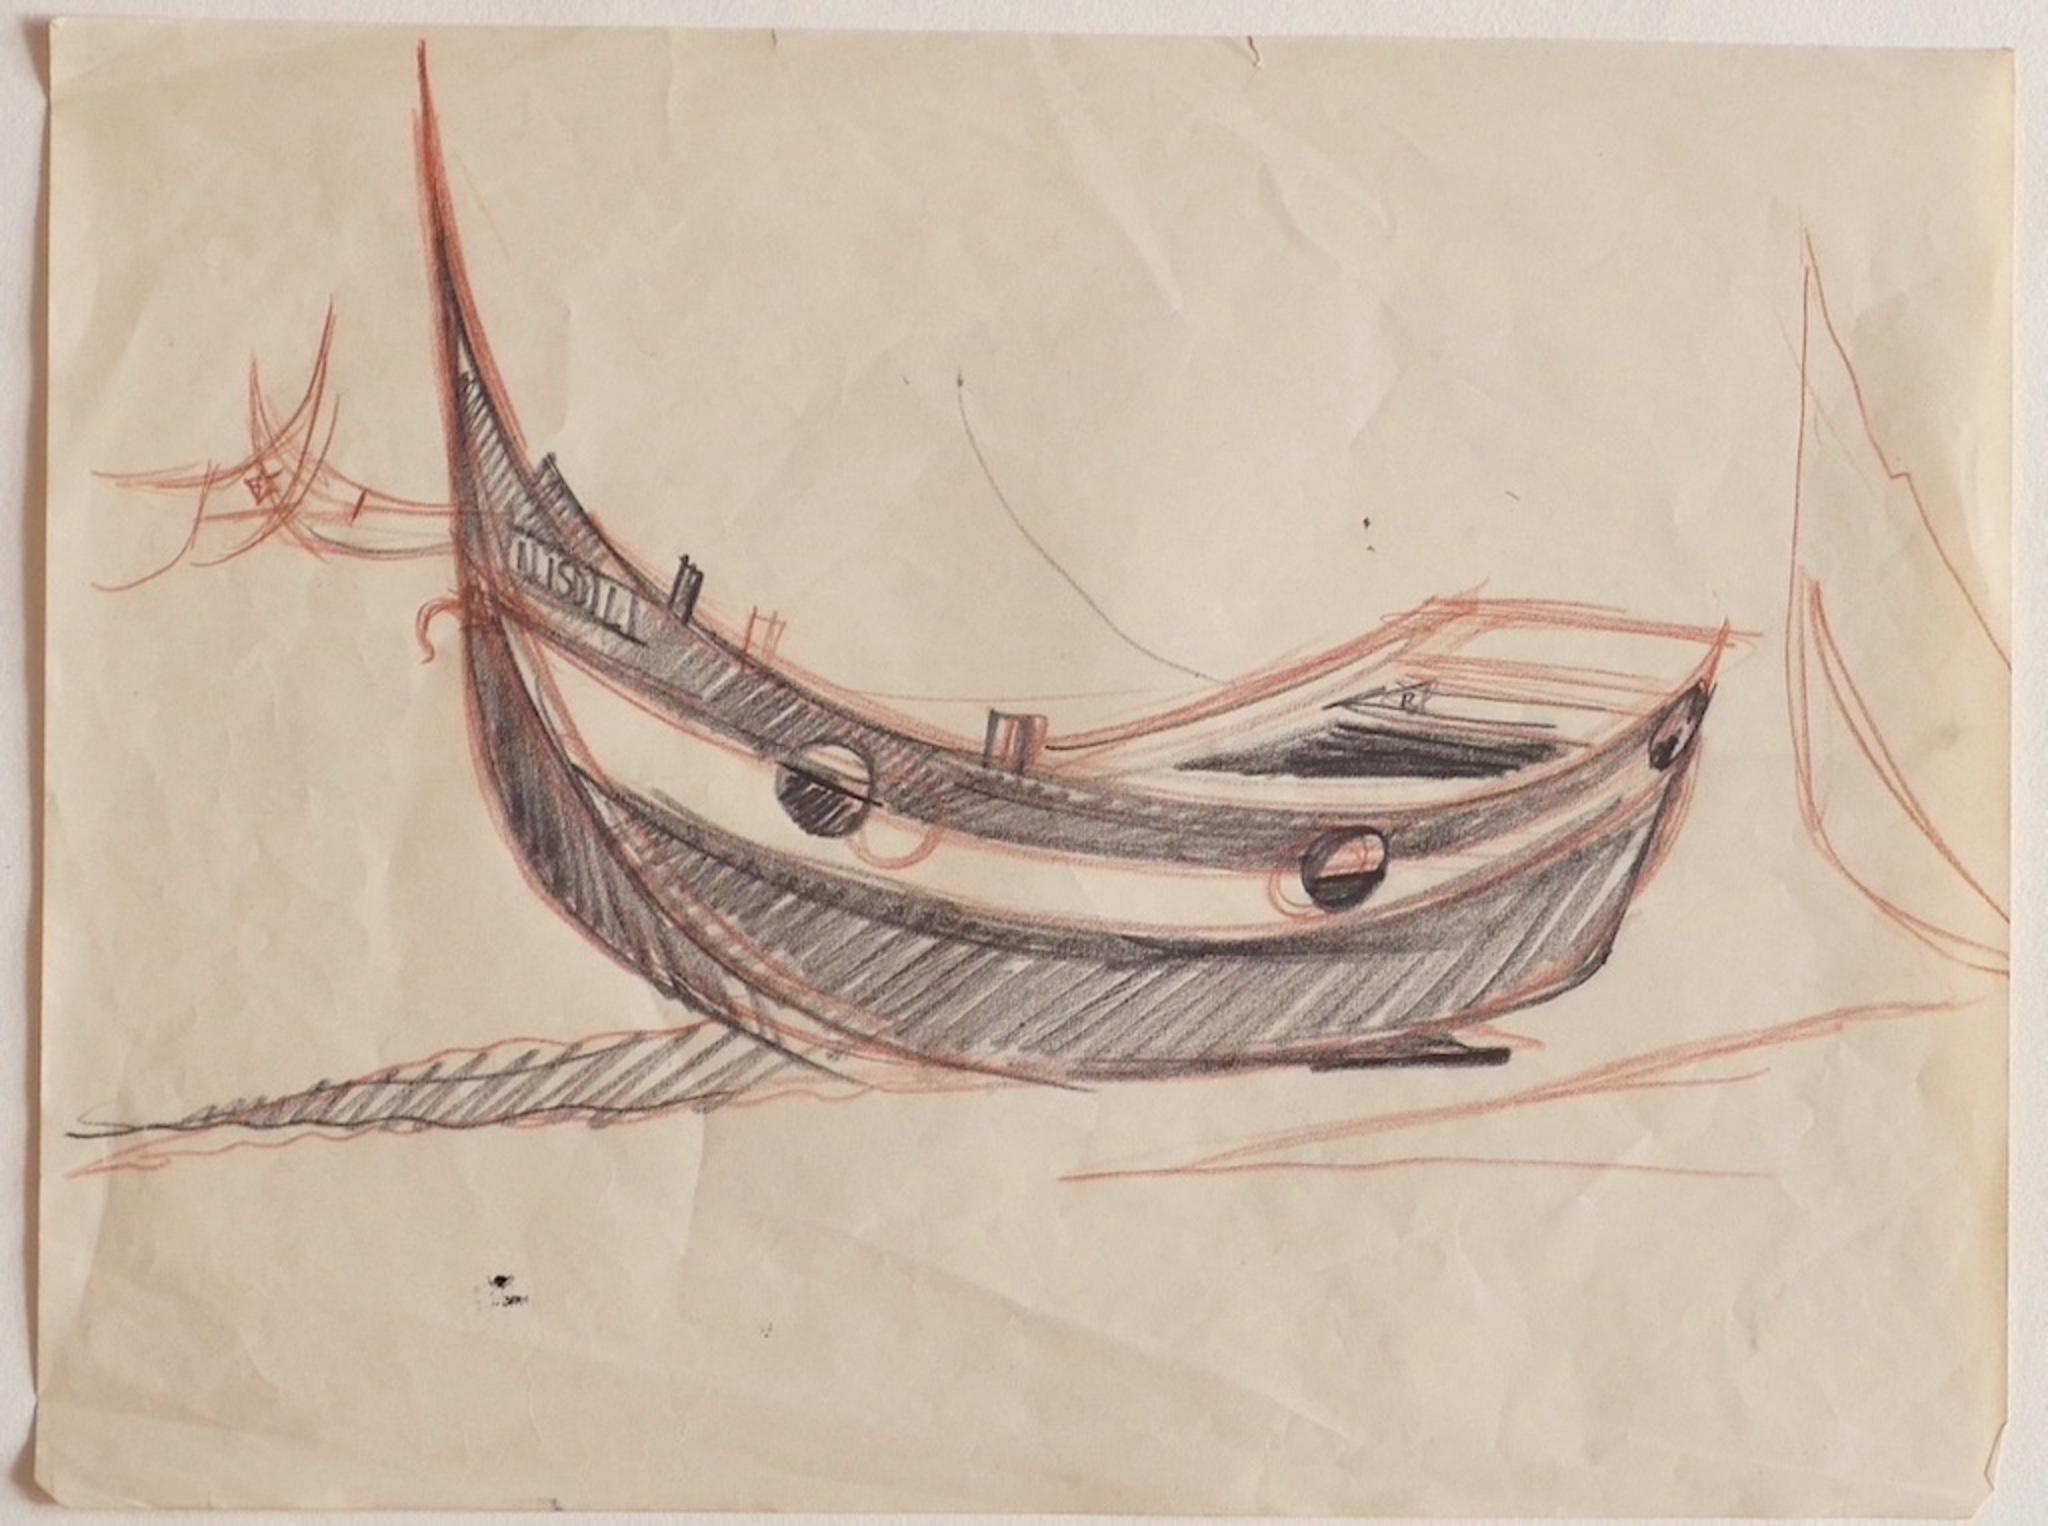 Unknown Figurative Art - Boats - Original Pencil and Pastel - Early 20th Century